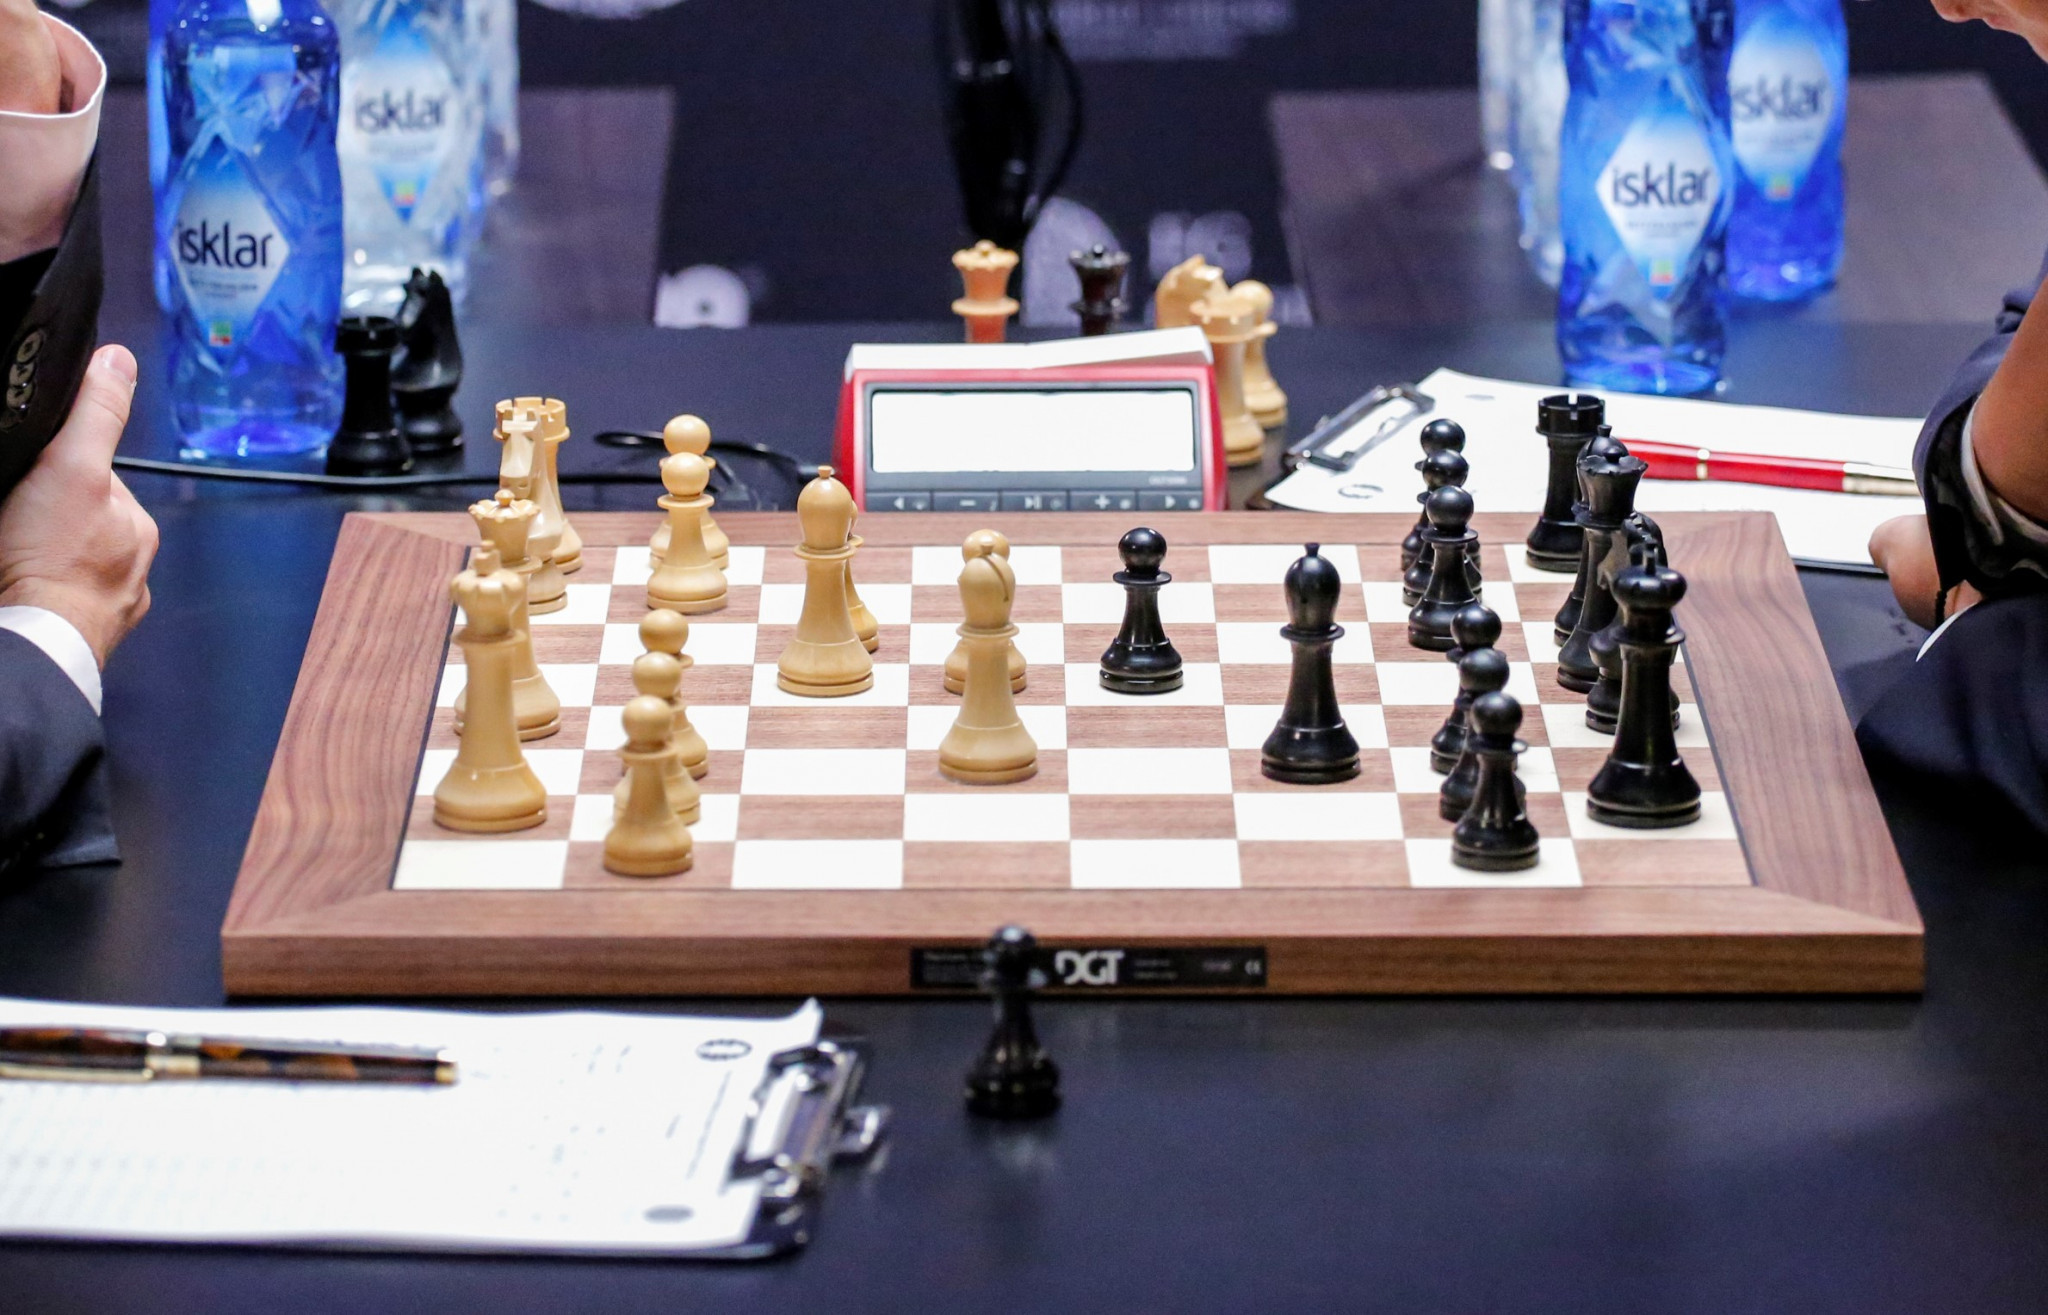 There is a three-way tie for the lead following the fifth round of matches at the European Individual Chess Championship in Reykjavik ©Getty Images